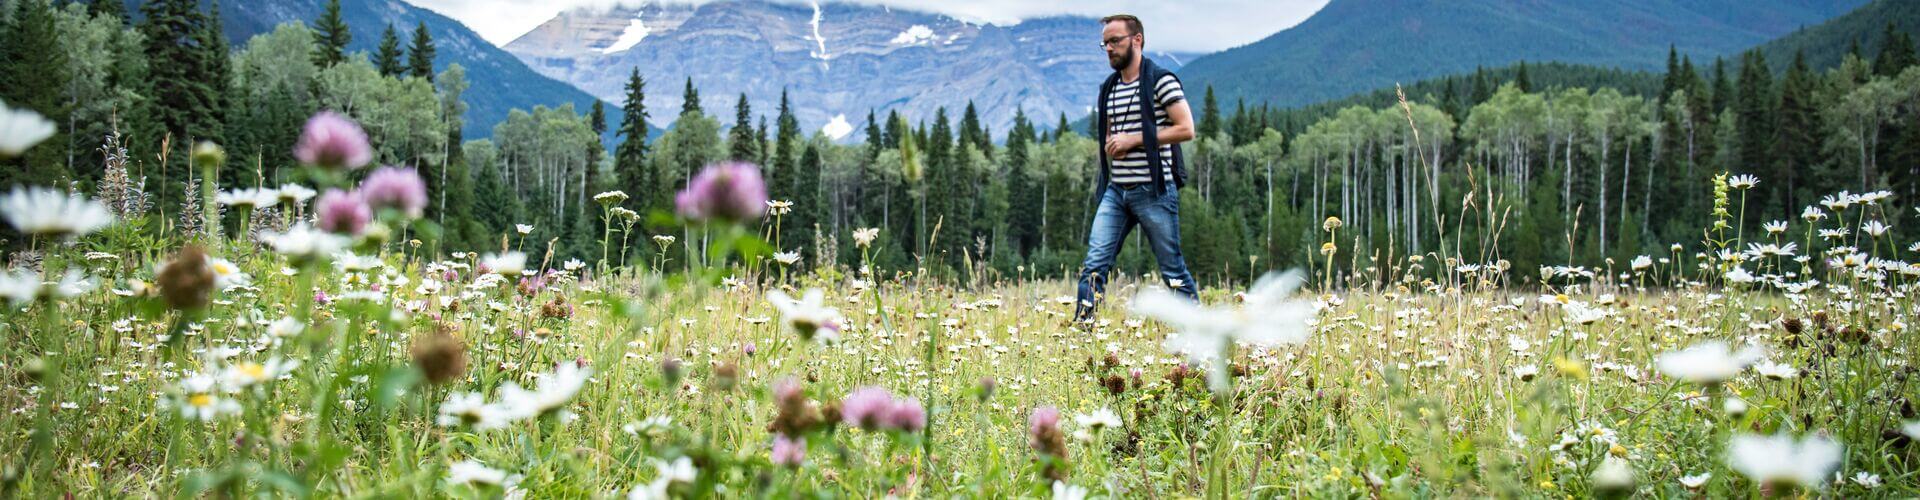 A hiker moving through wildflowers in Mount Robson Park, Canada